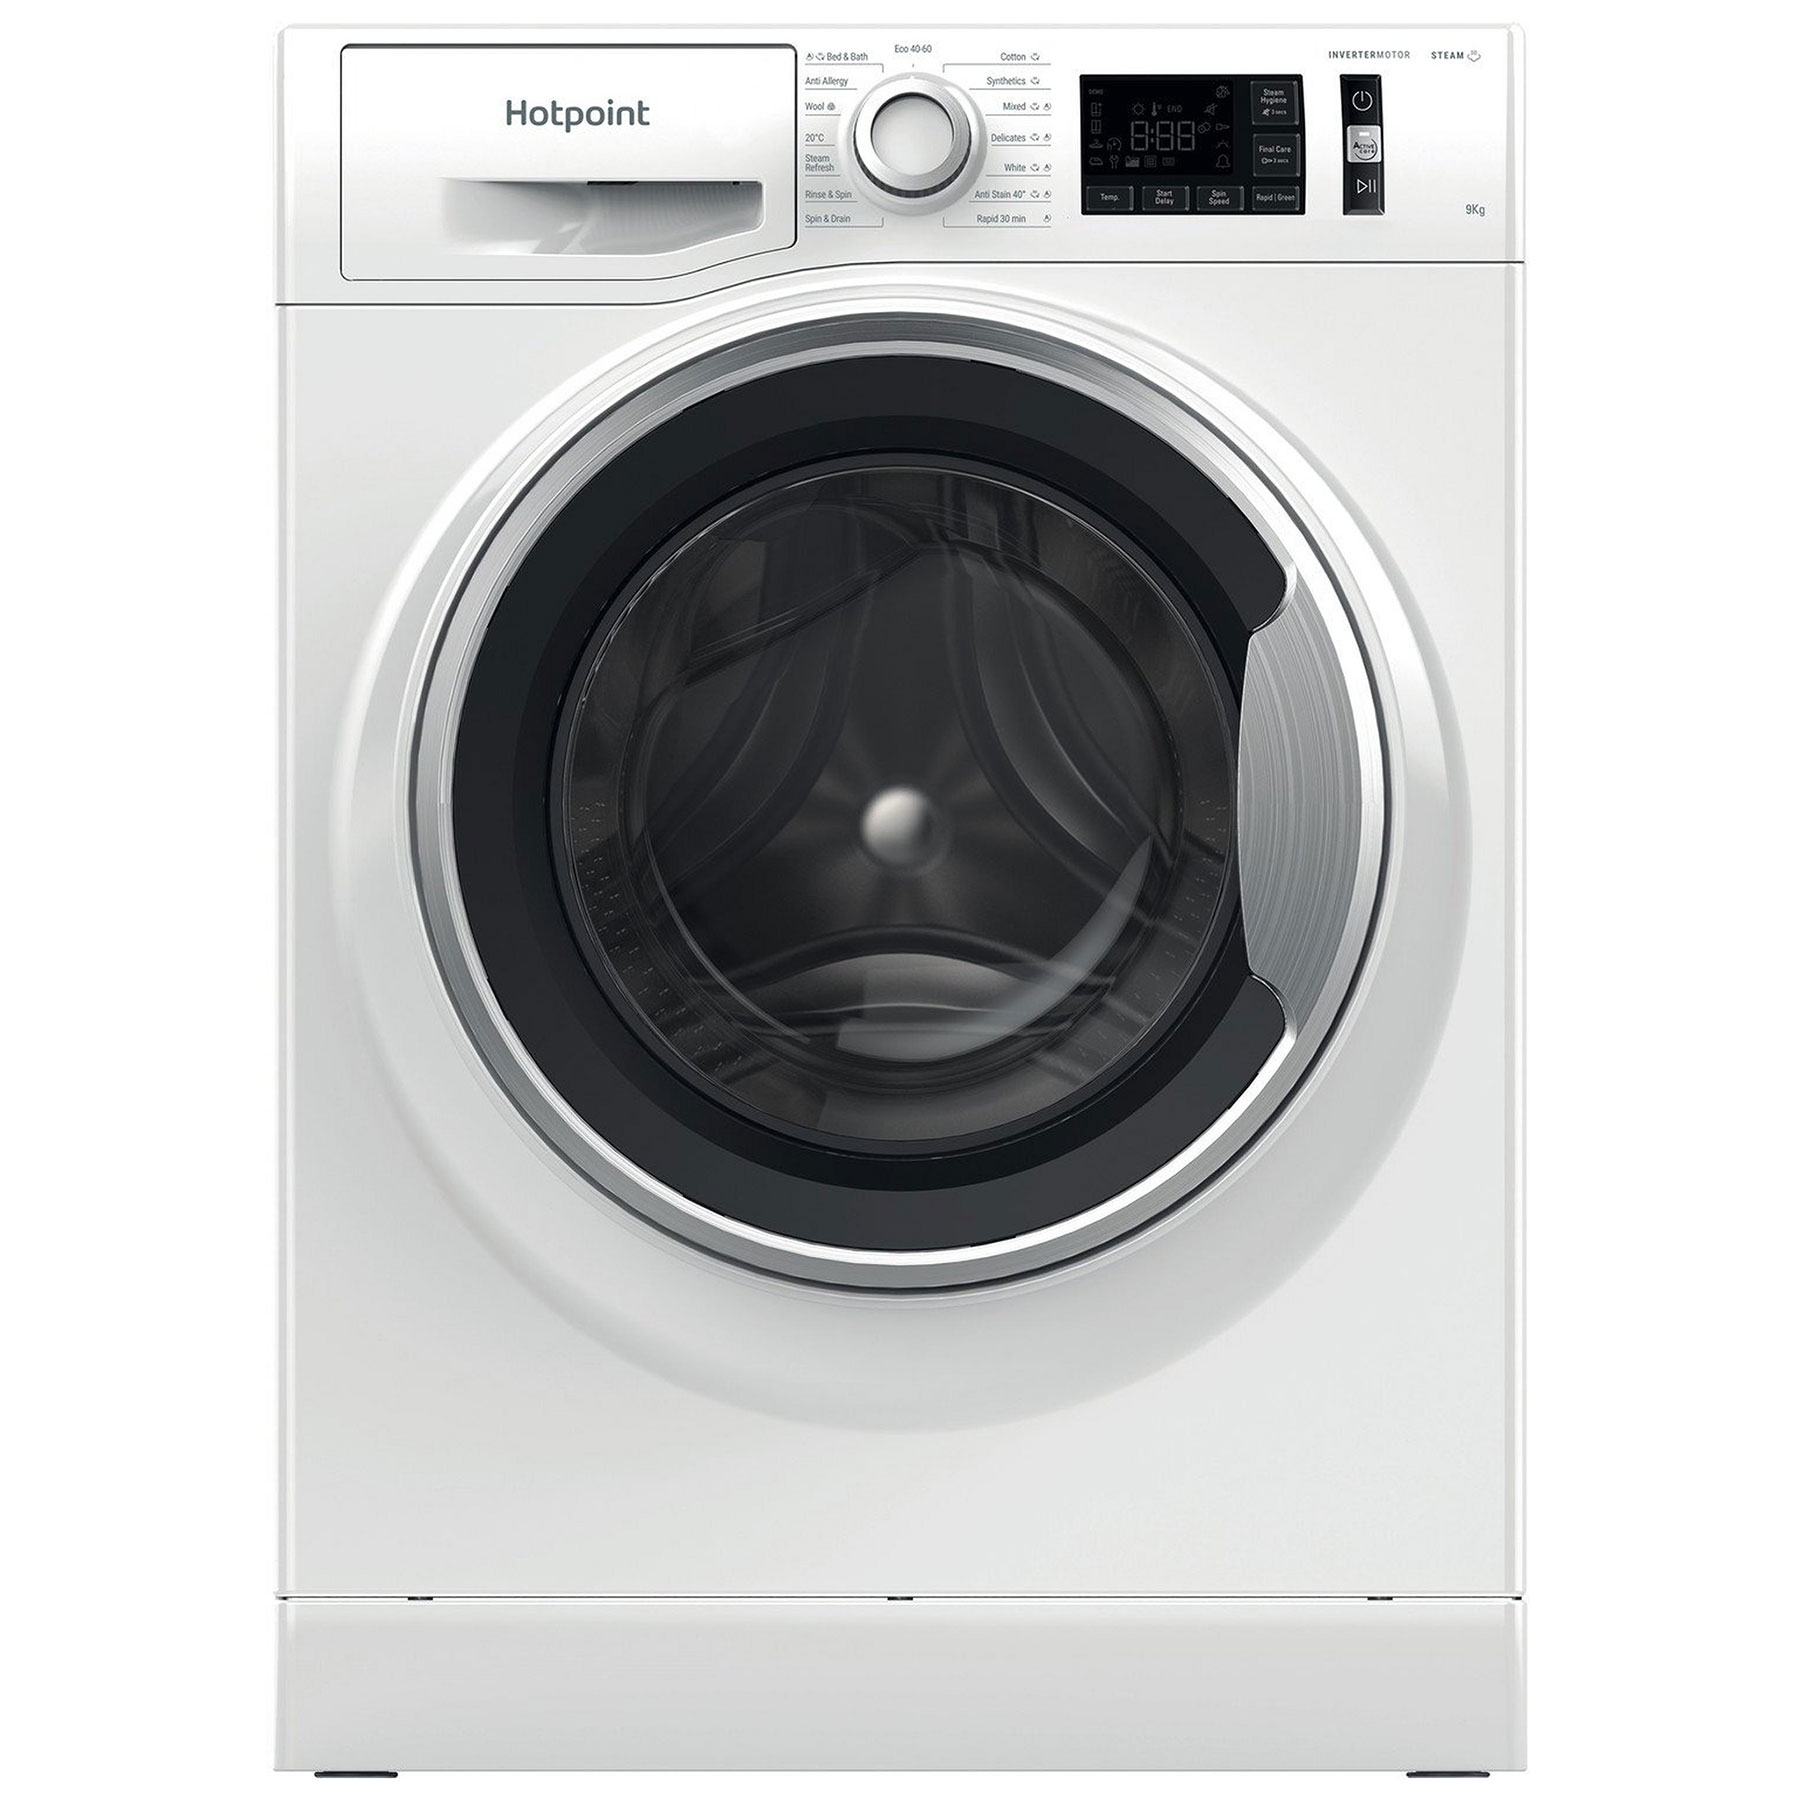 Hotpoint NM11948WSAUK Washing Machine in White 1400rpm 9Kg A Rated